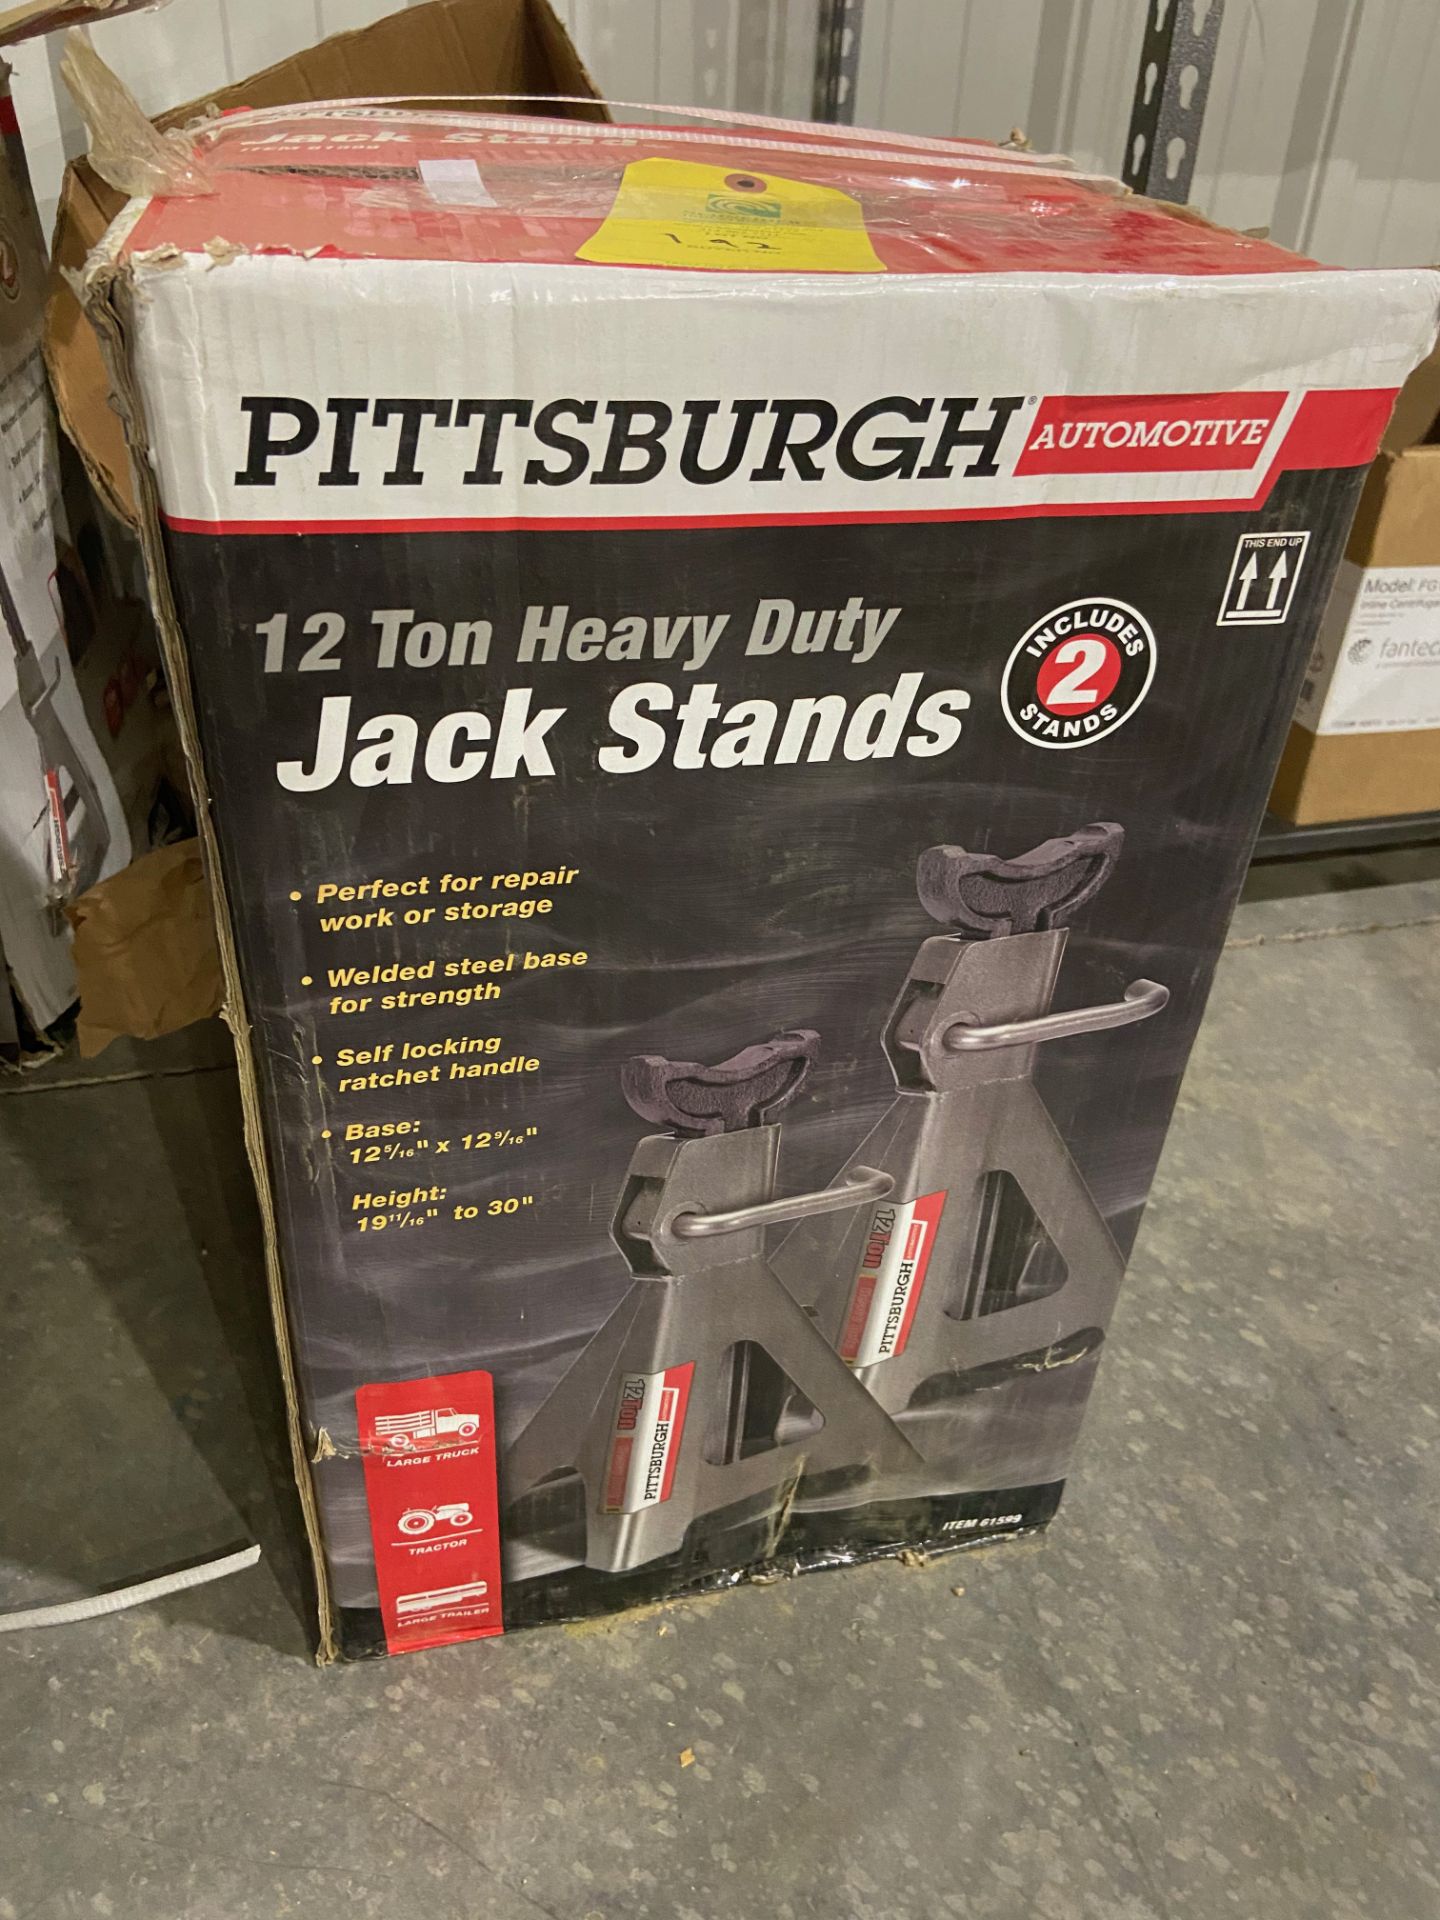 Pittsburgh Automotive 12 Ton Heavy Duty Jack Stand, Rigging Fee: $20